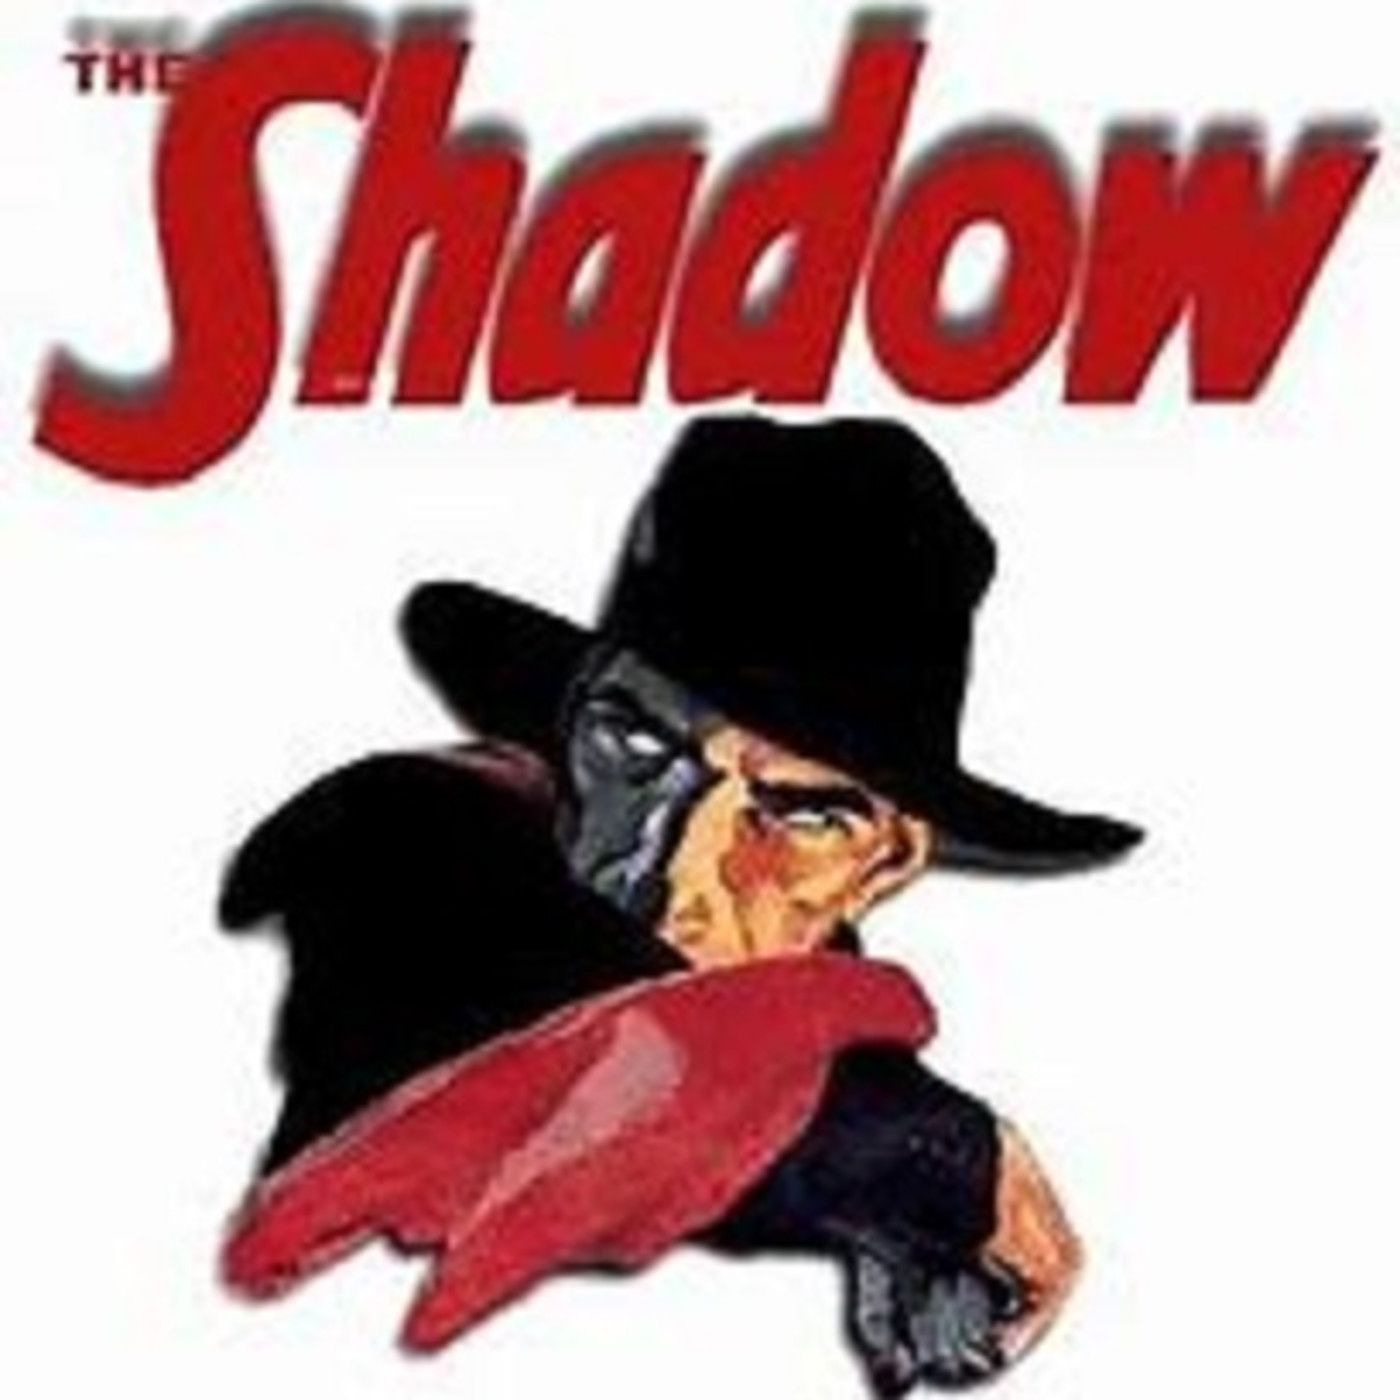 1939-1231 - The Cat That Killed - The Shadow